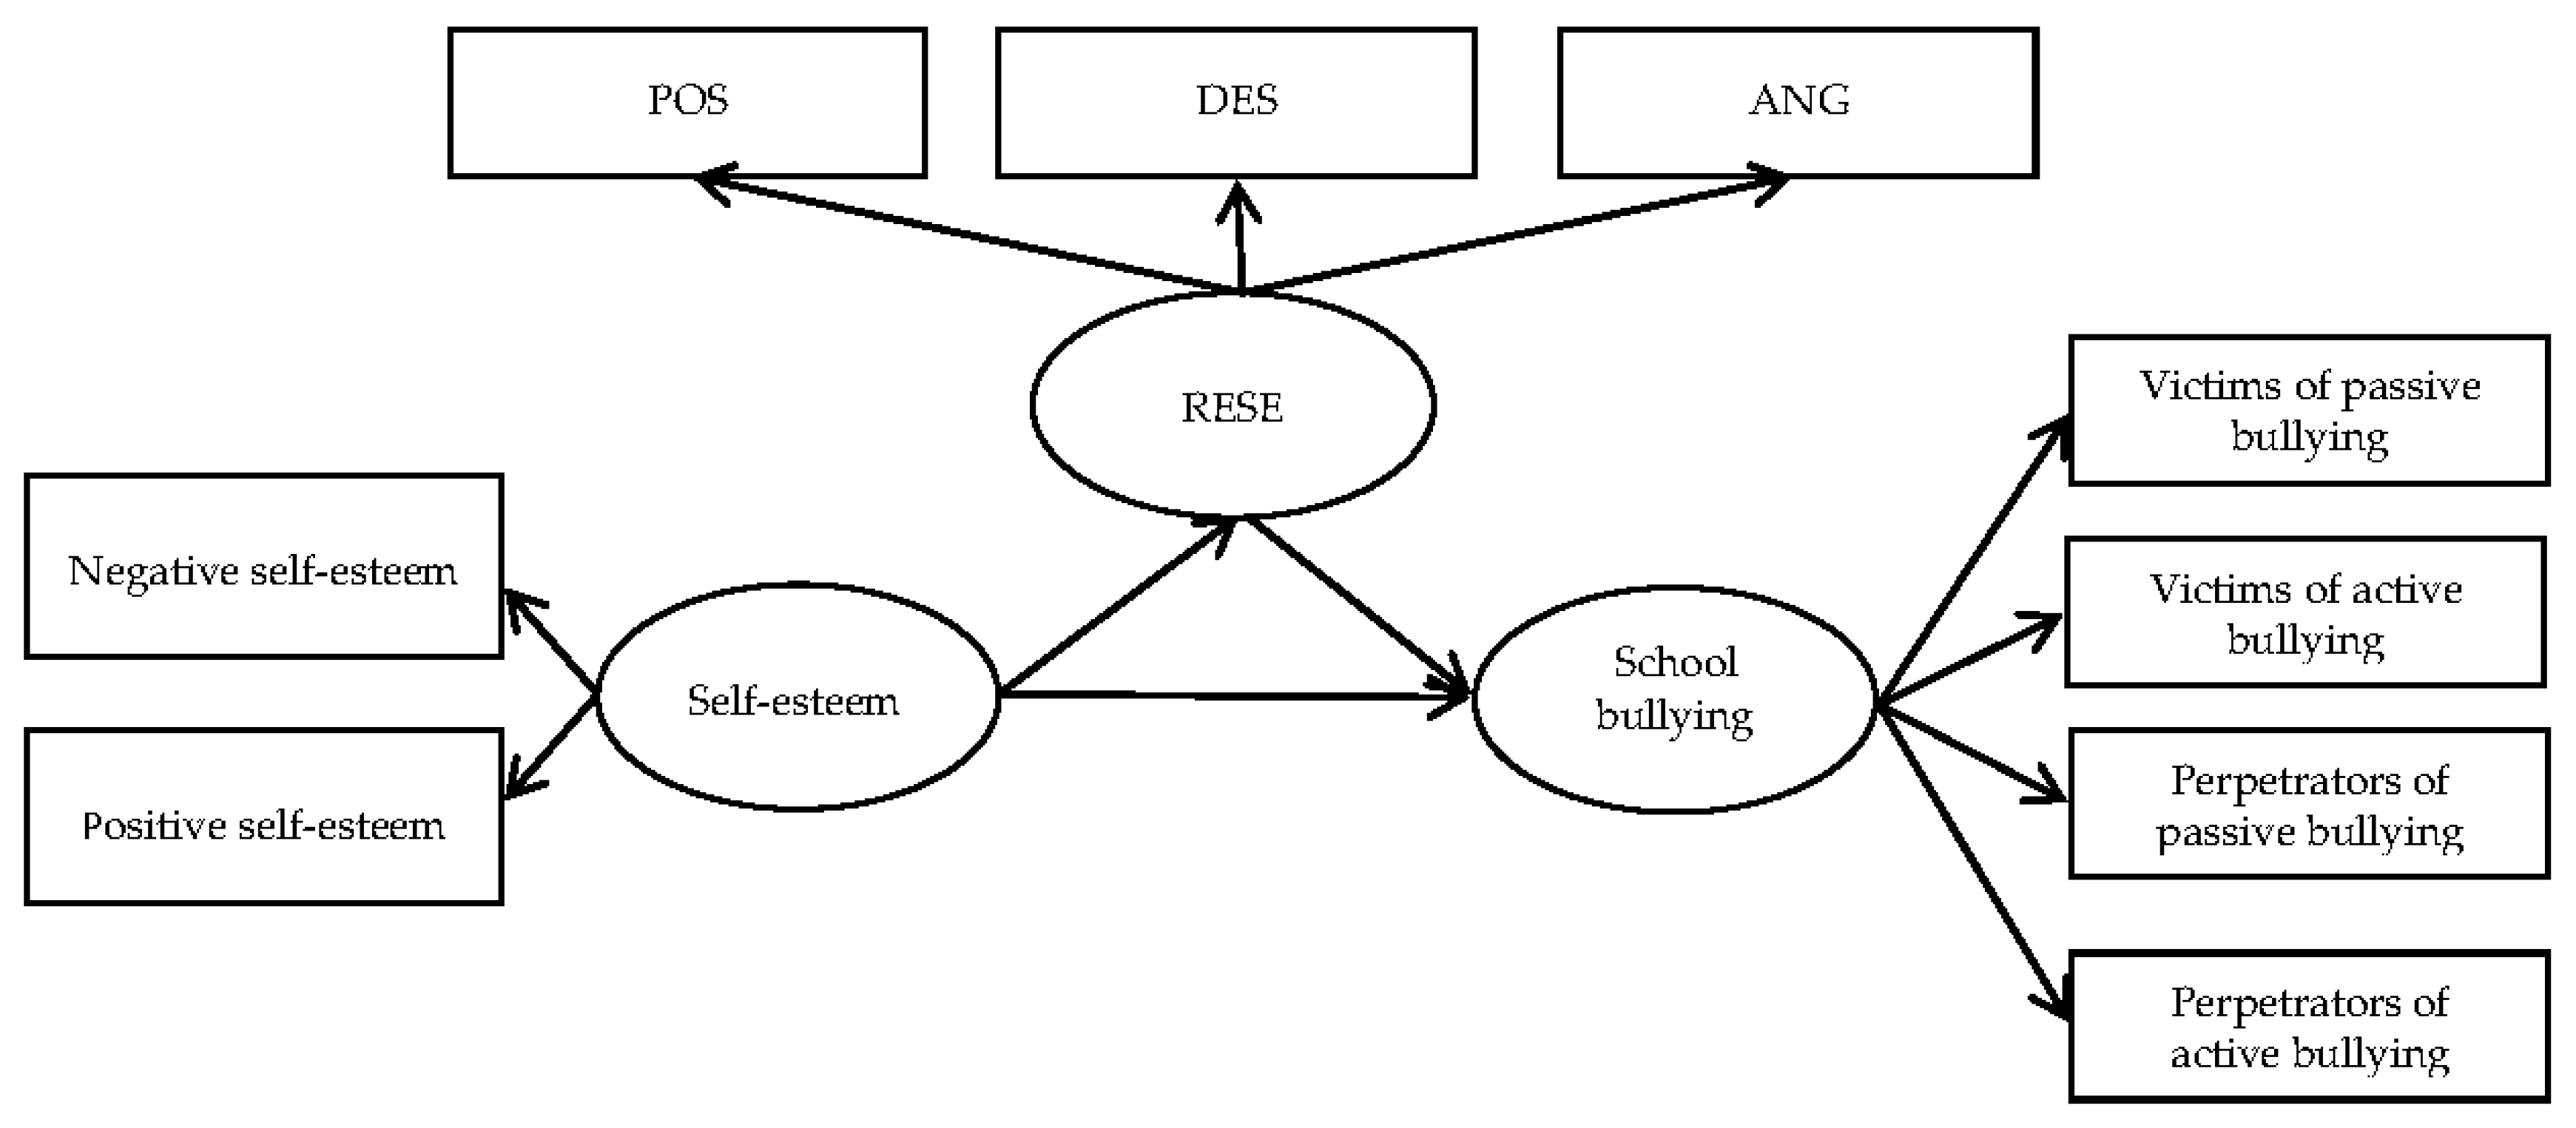 IJERPH | Free Full-Text | The Mediating Effect of Regulatory Emotional Self- Efficacy on the Association between Self-Esteem and School Bullying in  Middle School Students: A Cross-Sectional Study